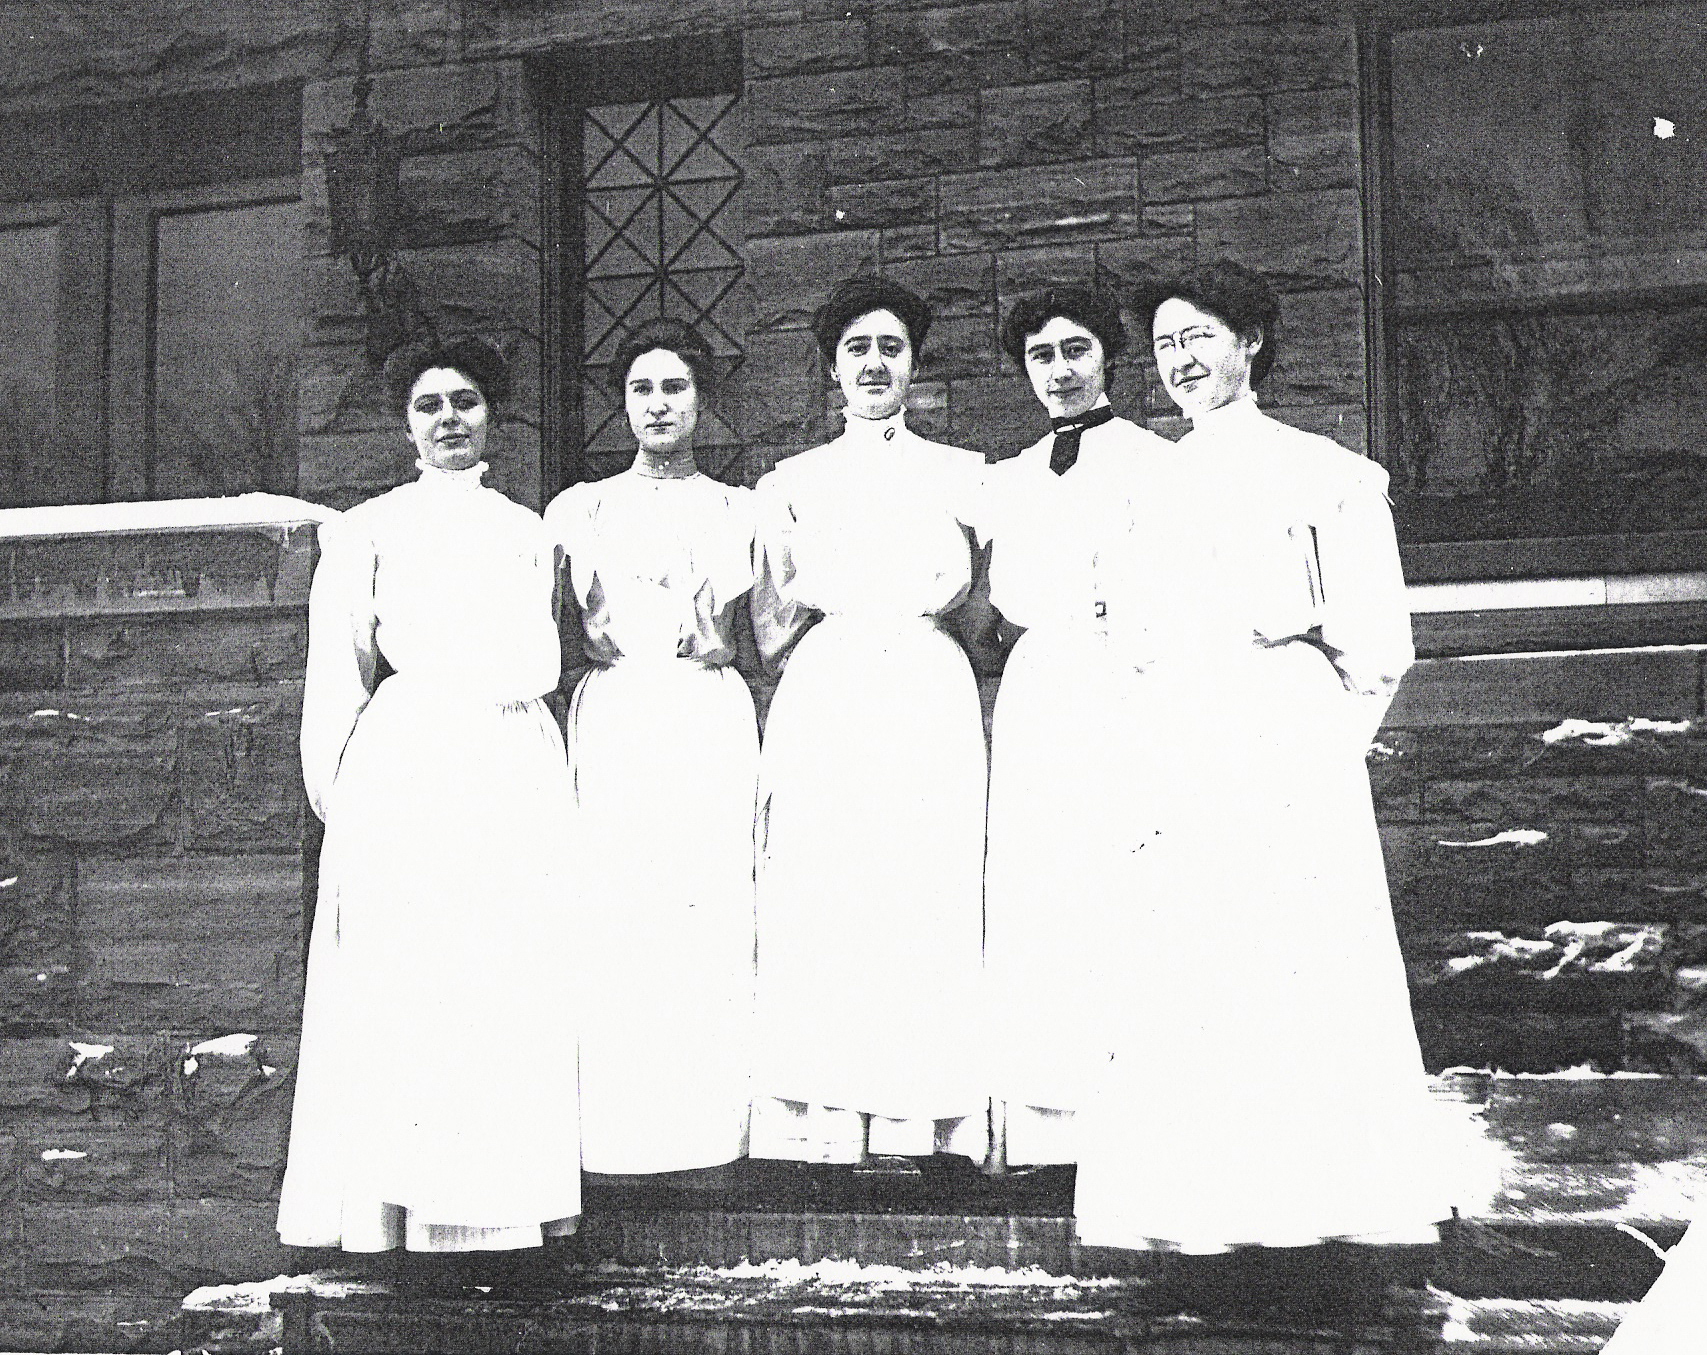 The first women enrolled at Clarkson in 1896